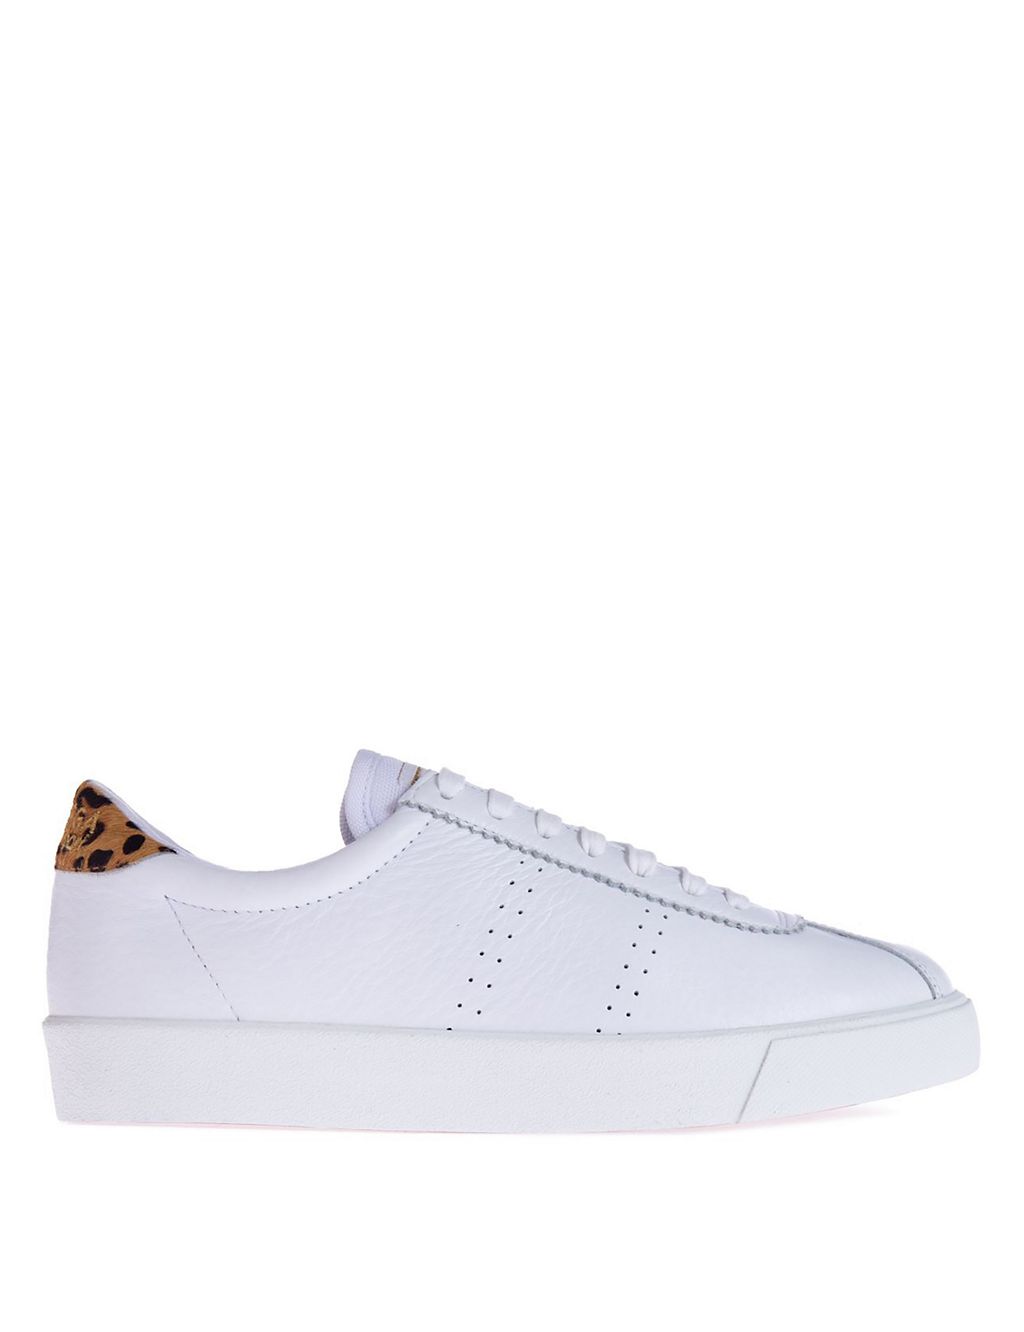 2843 Sport Club S Leather Lace Up Trainers 3 of 3